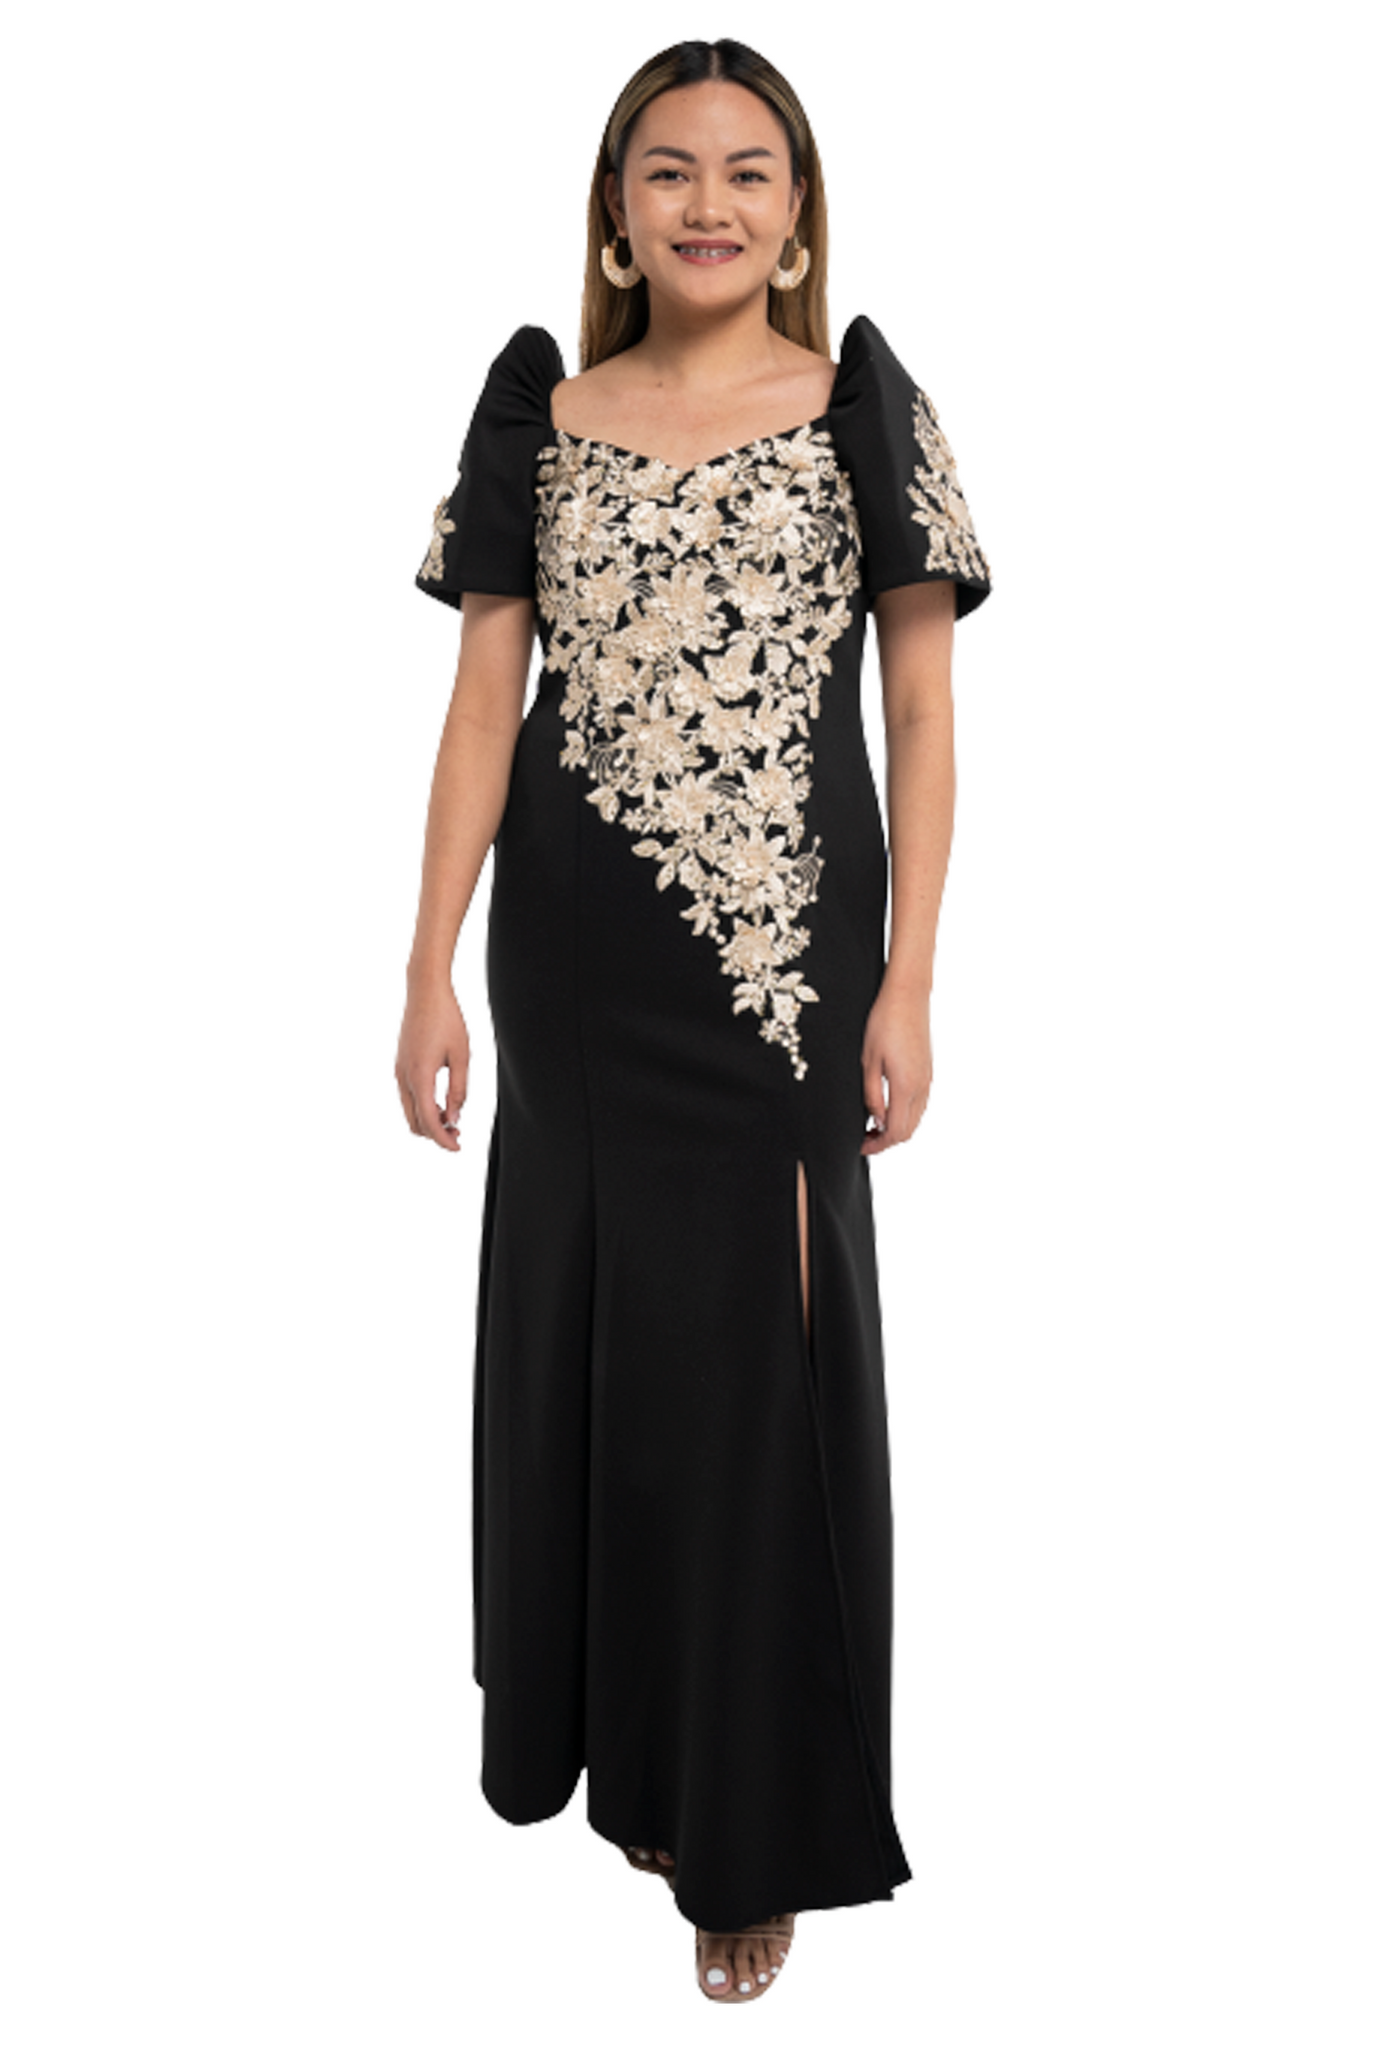 Filipiniana Dress & Gowns | Order Online + Fast Delivery – Barong World